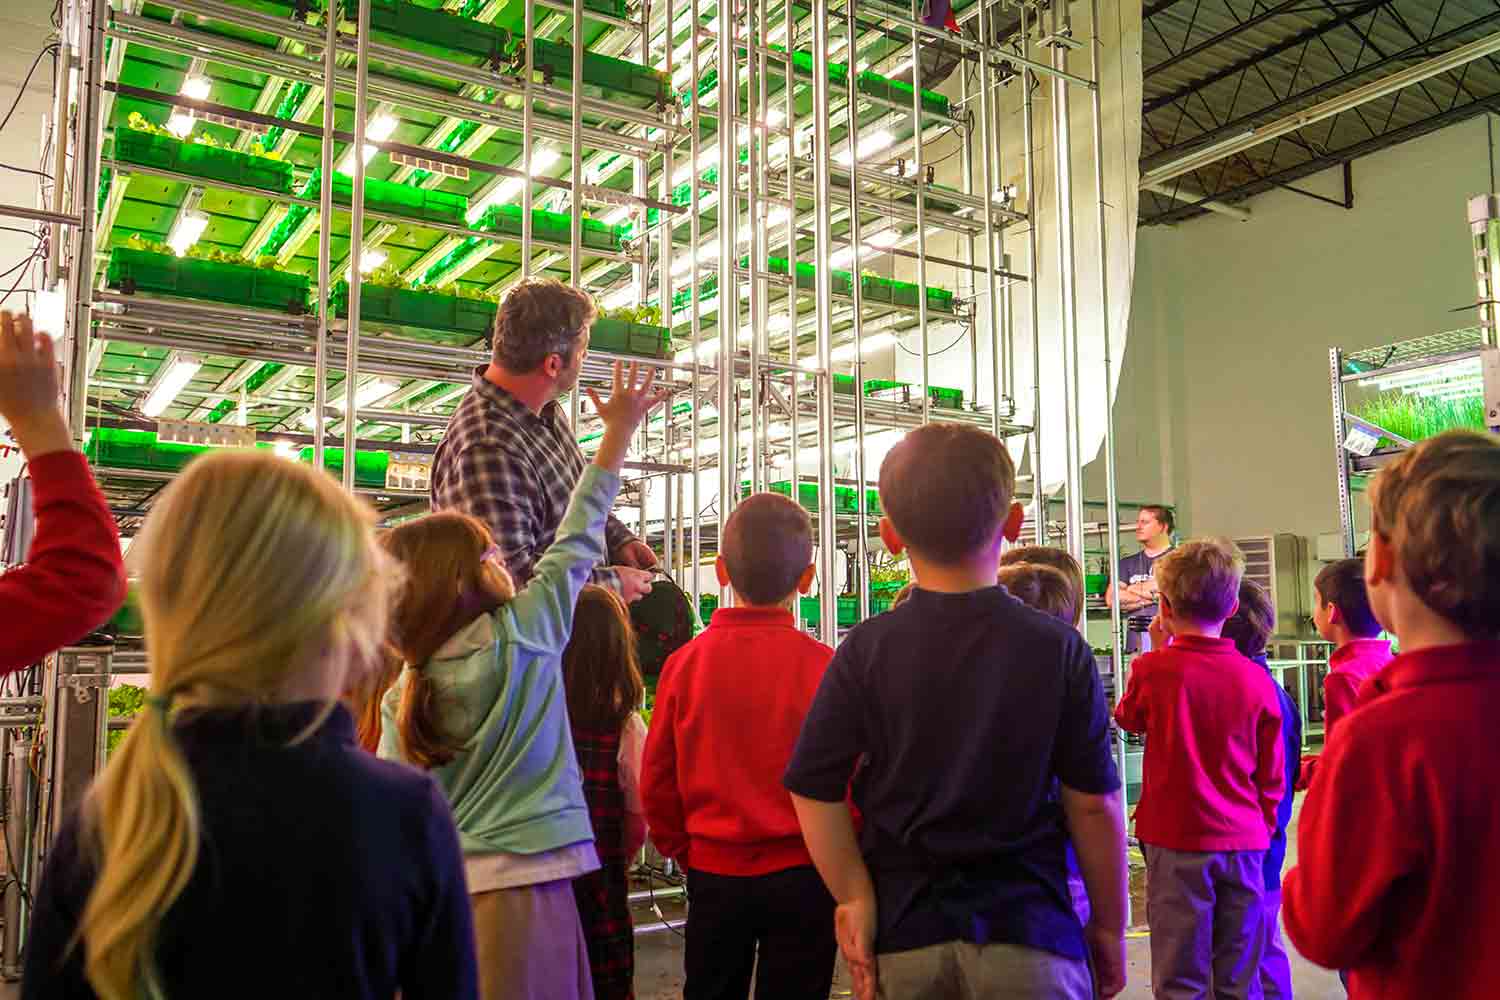 A man and a group of young children stand facing scaffolding that holds several layers of seedlings.